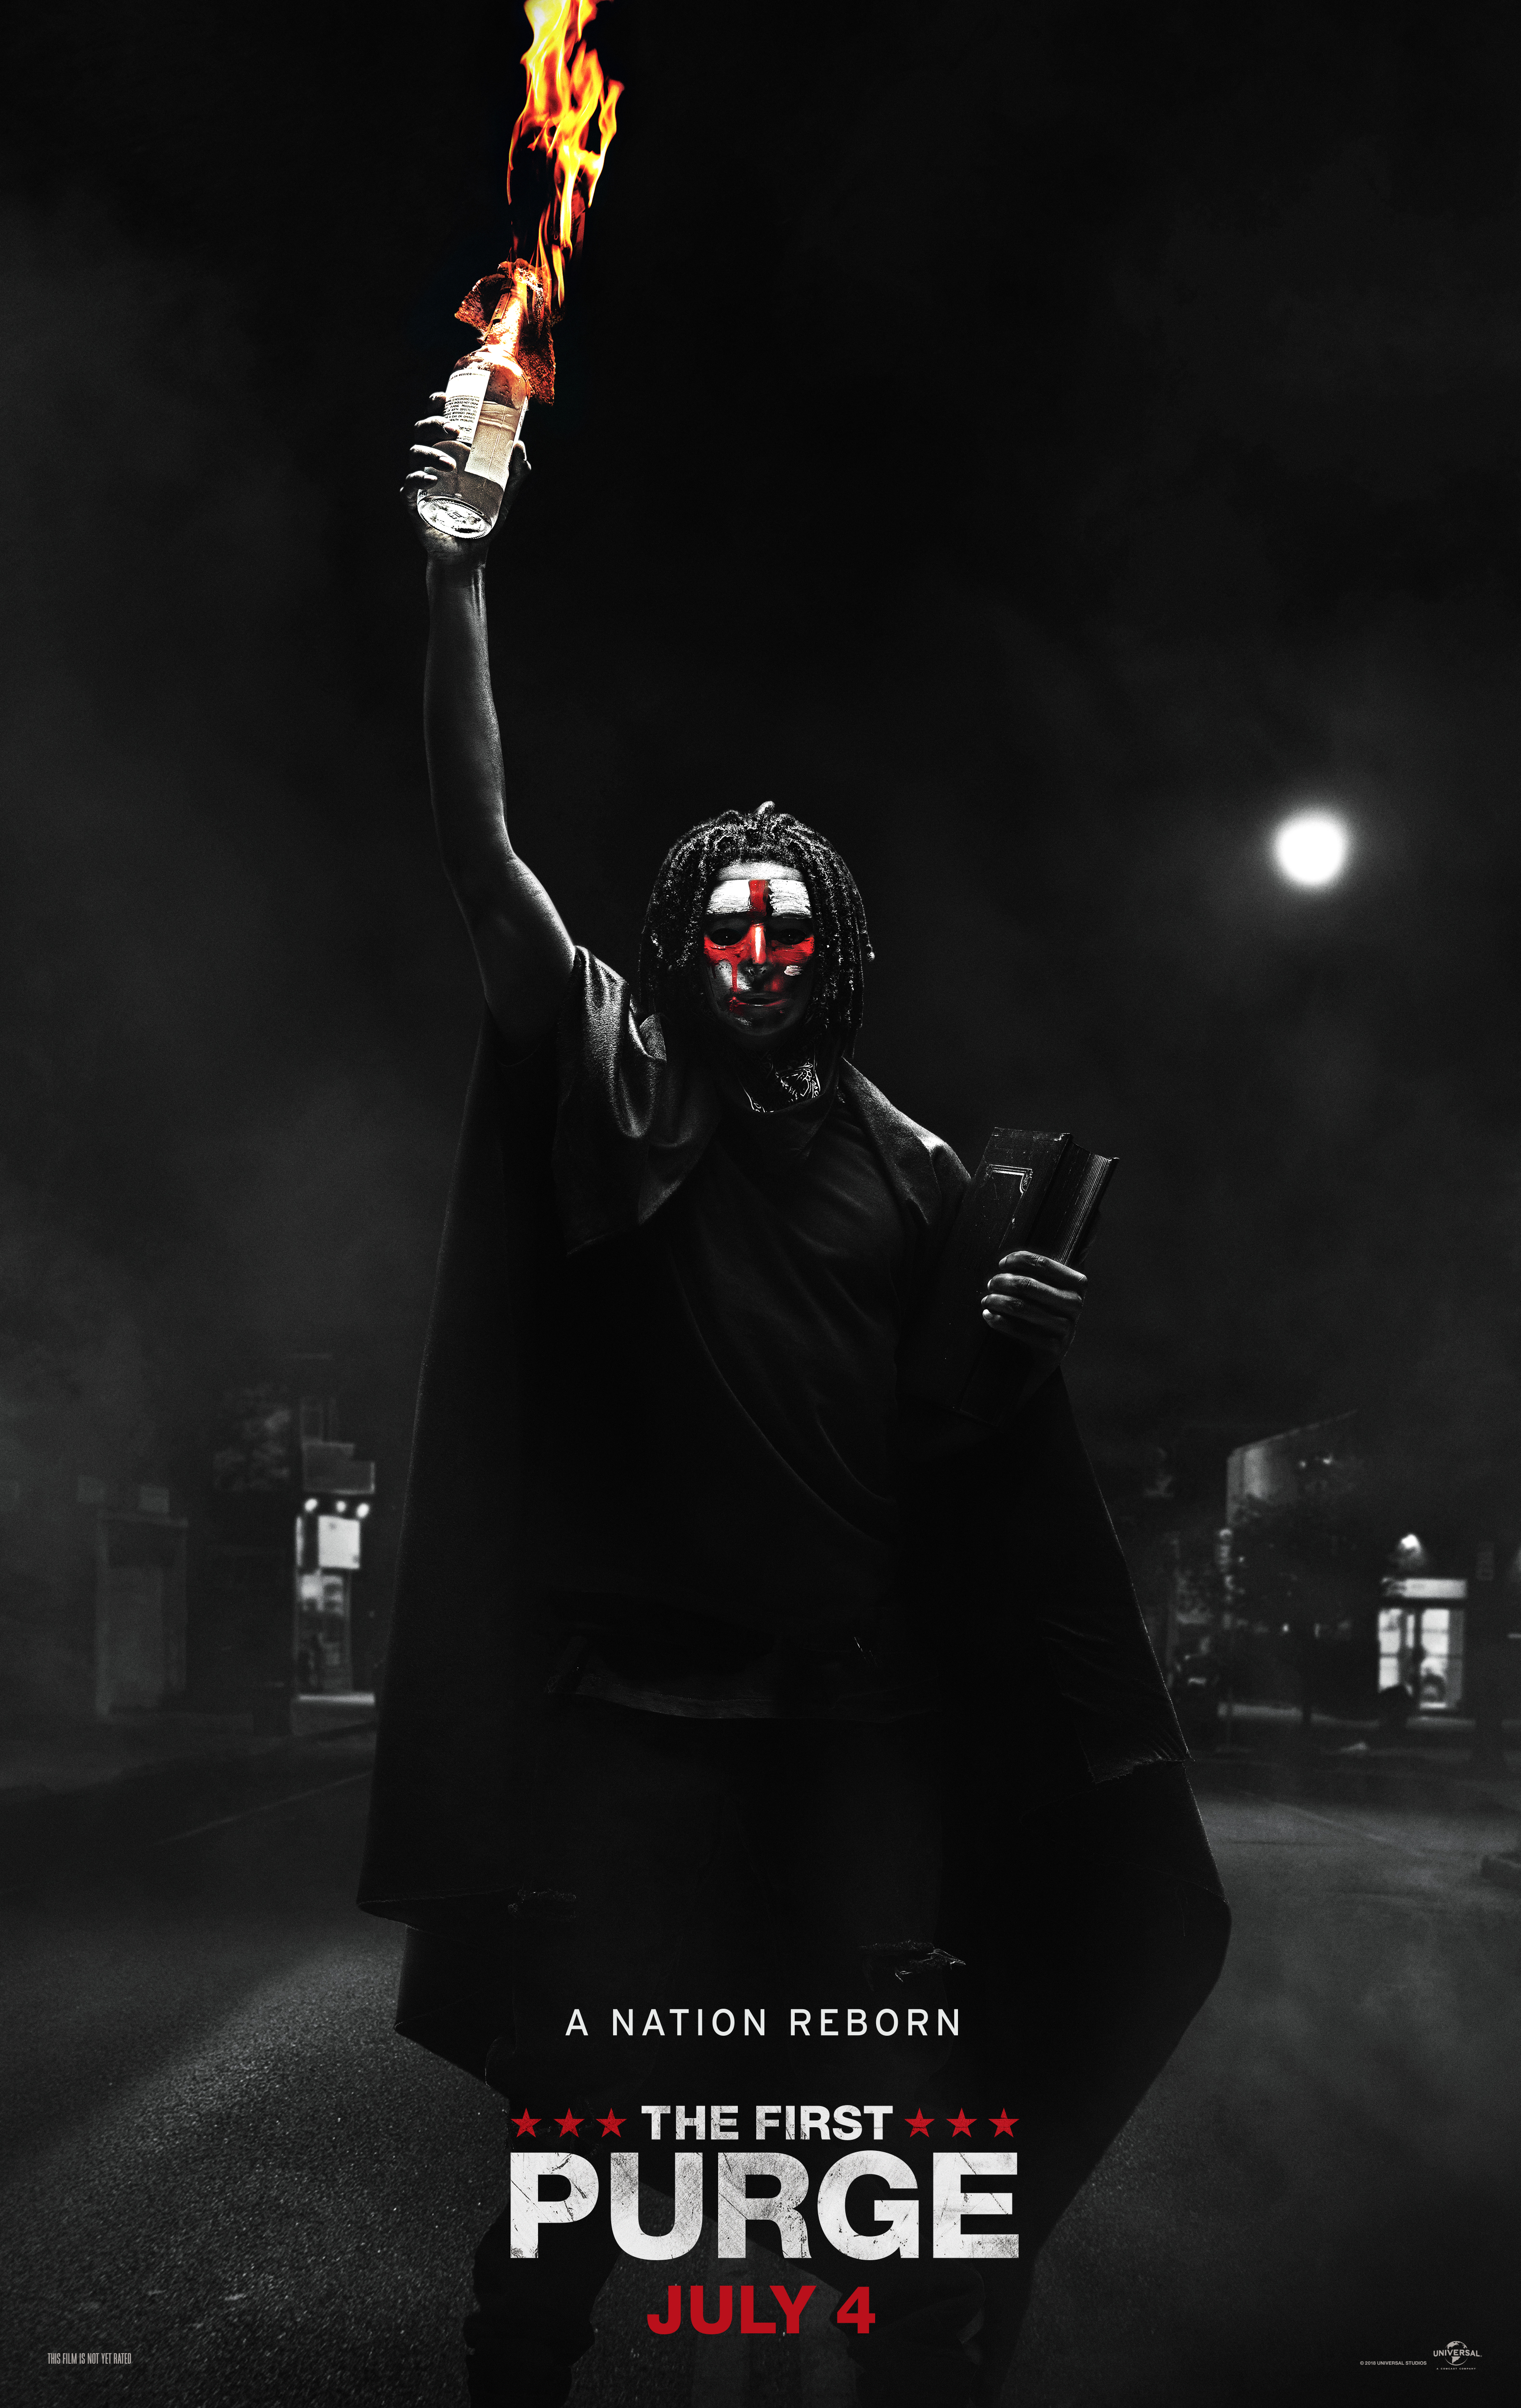 New The First Purge Featurette And Clip Released | Nothing But Geek3158 x 5000